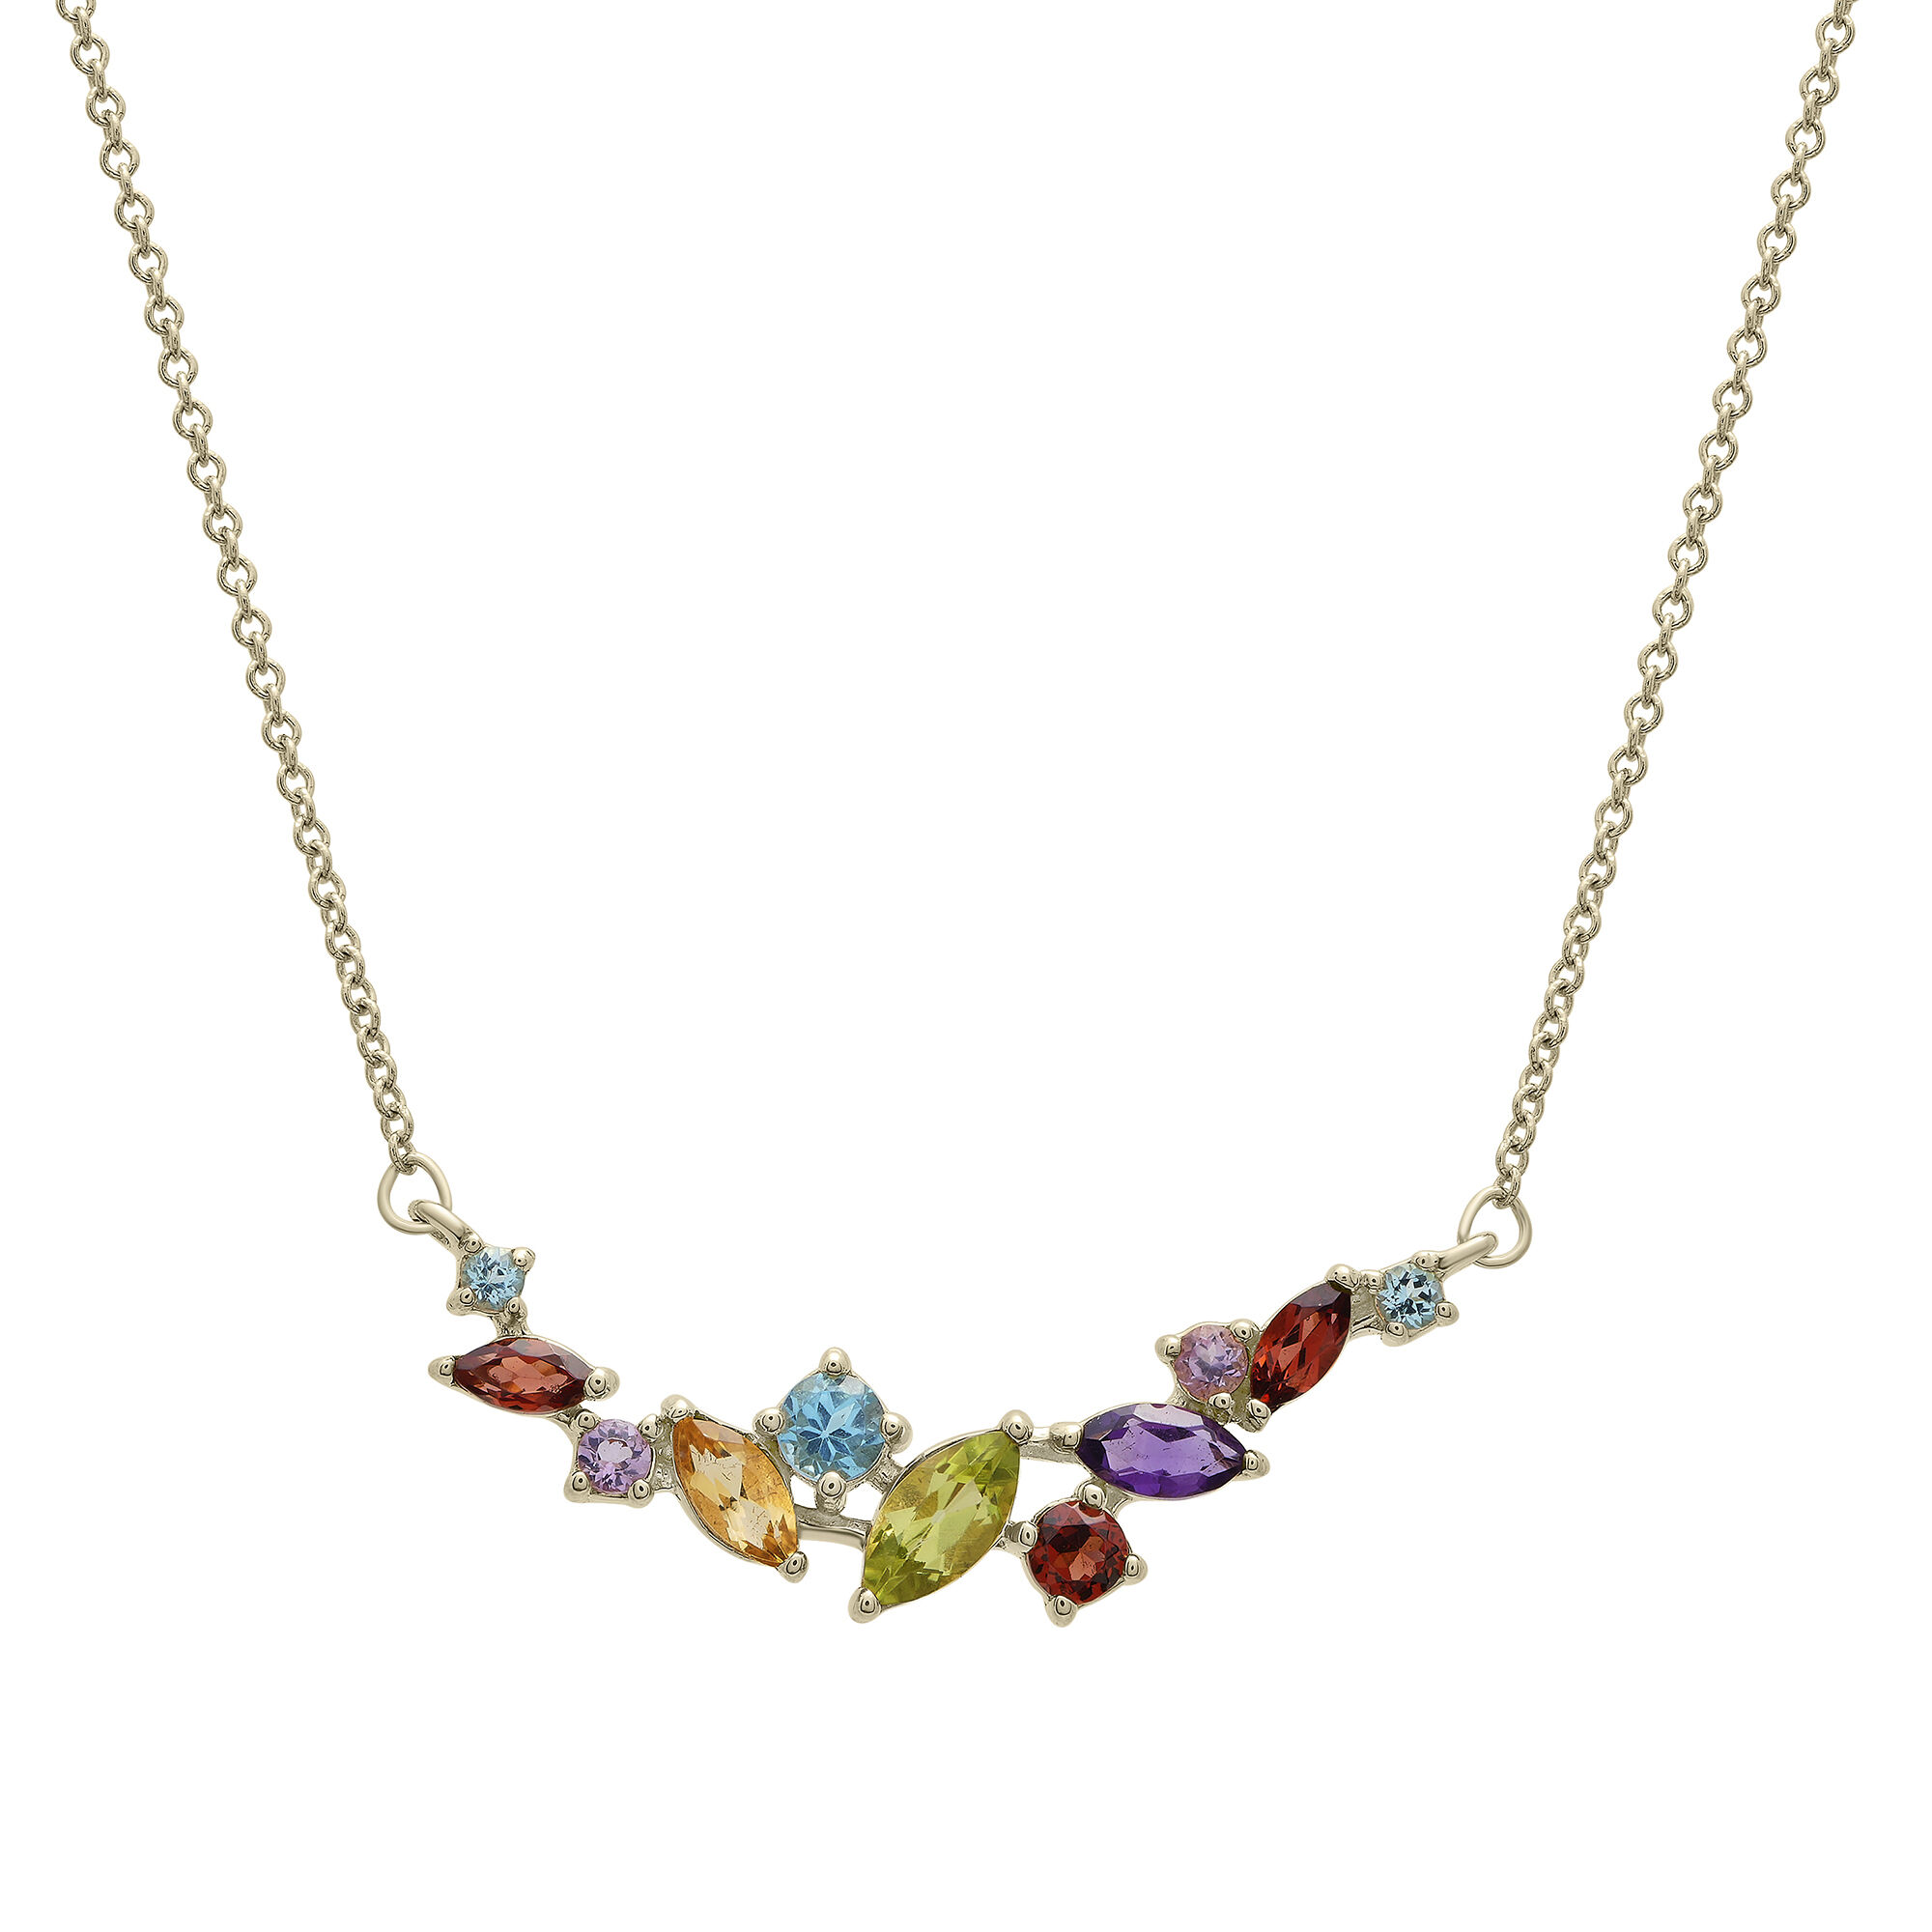 Glamorous Multi Color 925 Silver Gemstone Necklace Weight: 105.4 Grams (g)  at Best Price in Jaipur | Art Palace